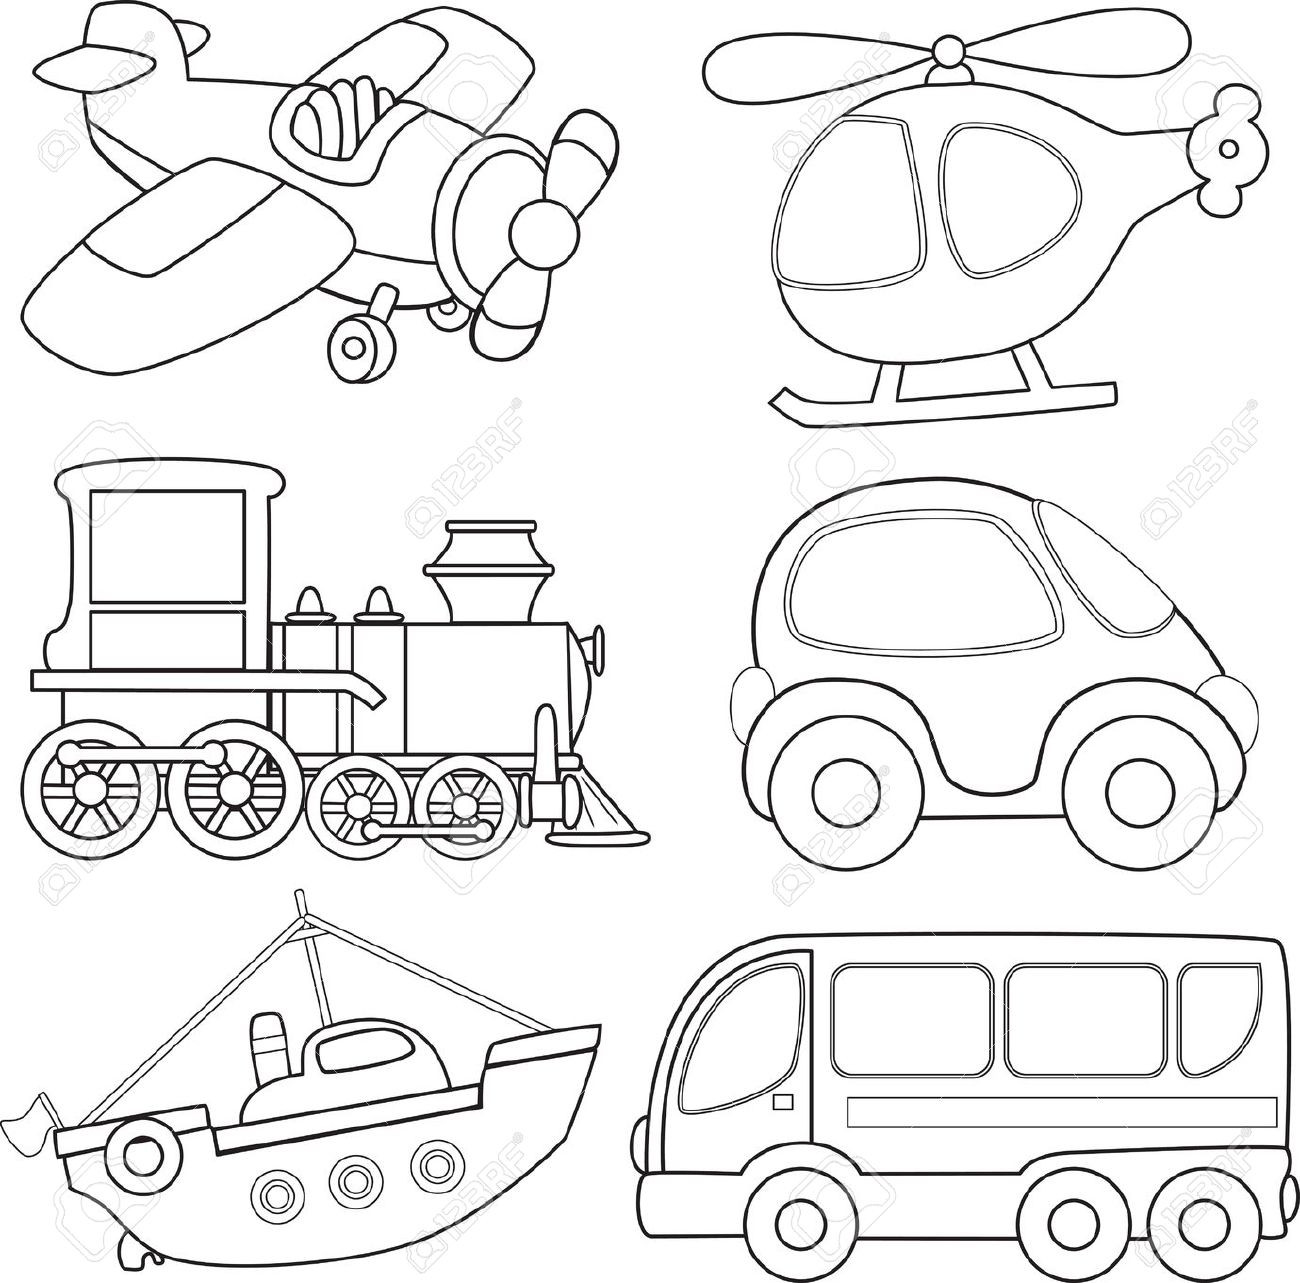 Transportation Coloring Pages For Toddlers
 Beautiful Design Transport Colouring Pages Pioneering